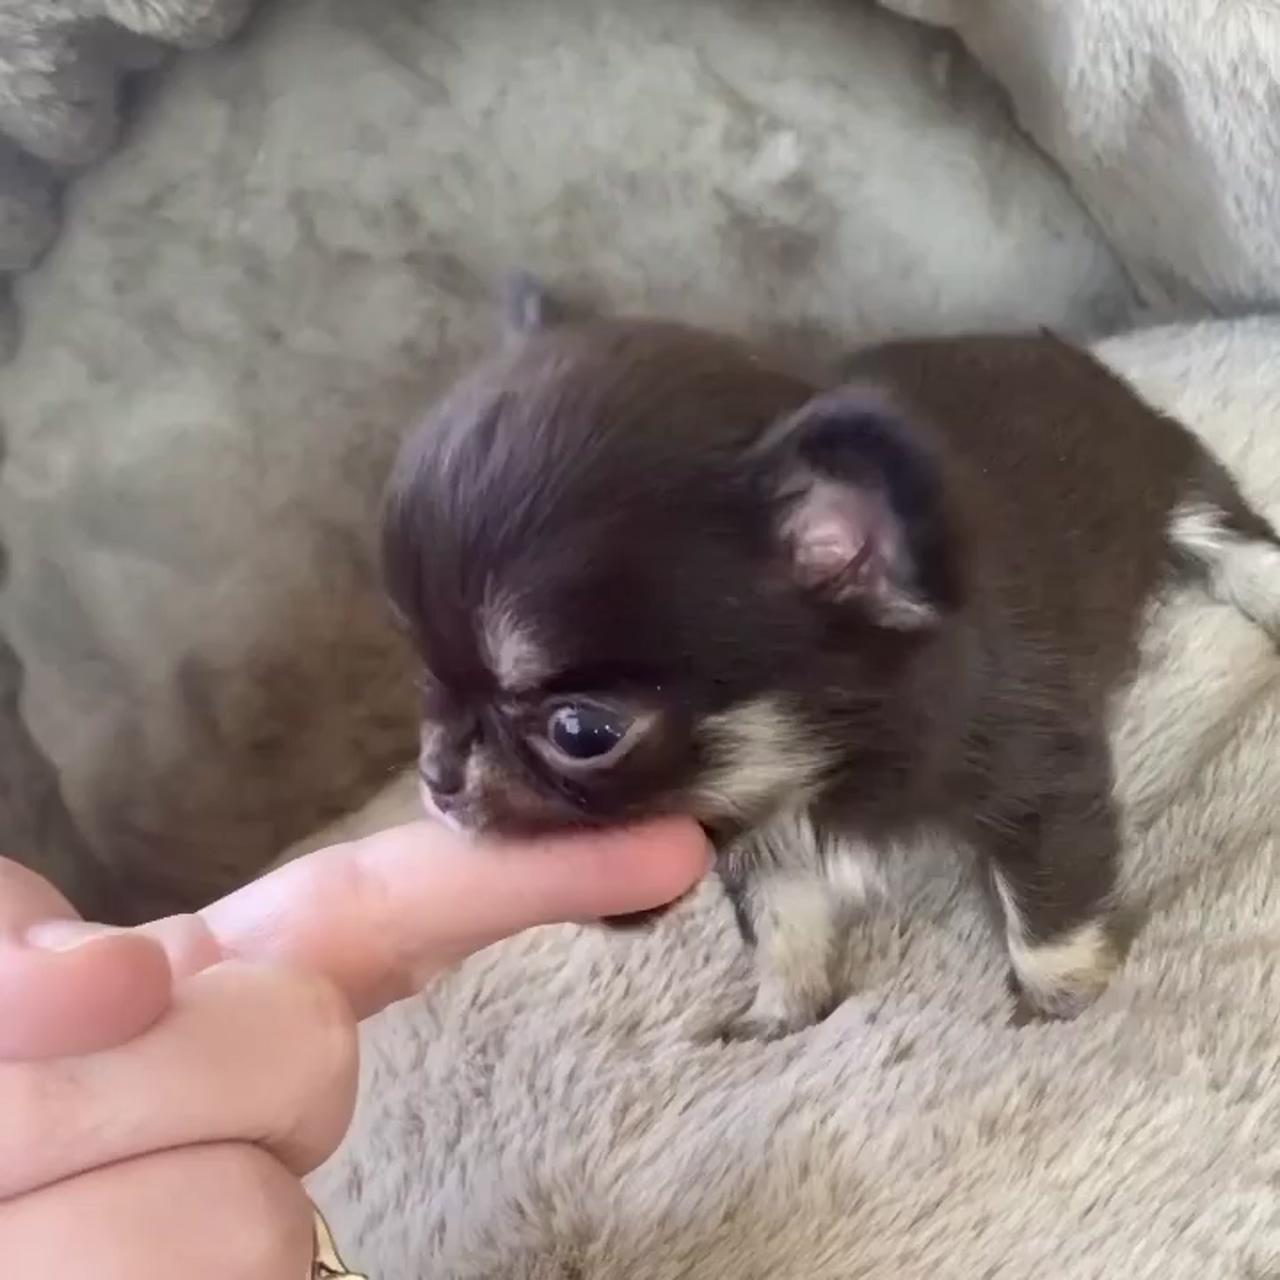 The bite force of a chihuahua; so so innocent adorable 